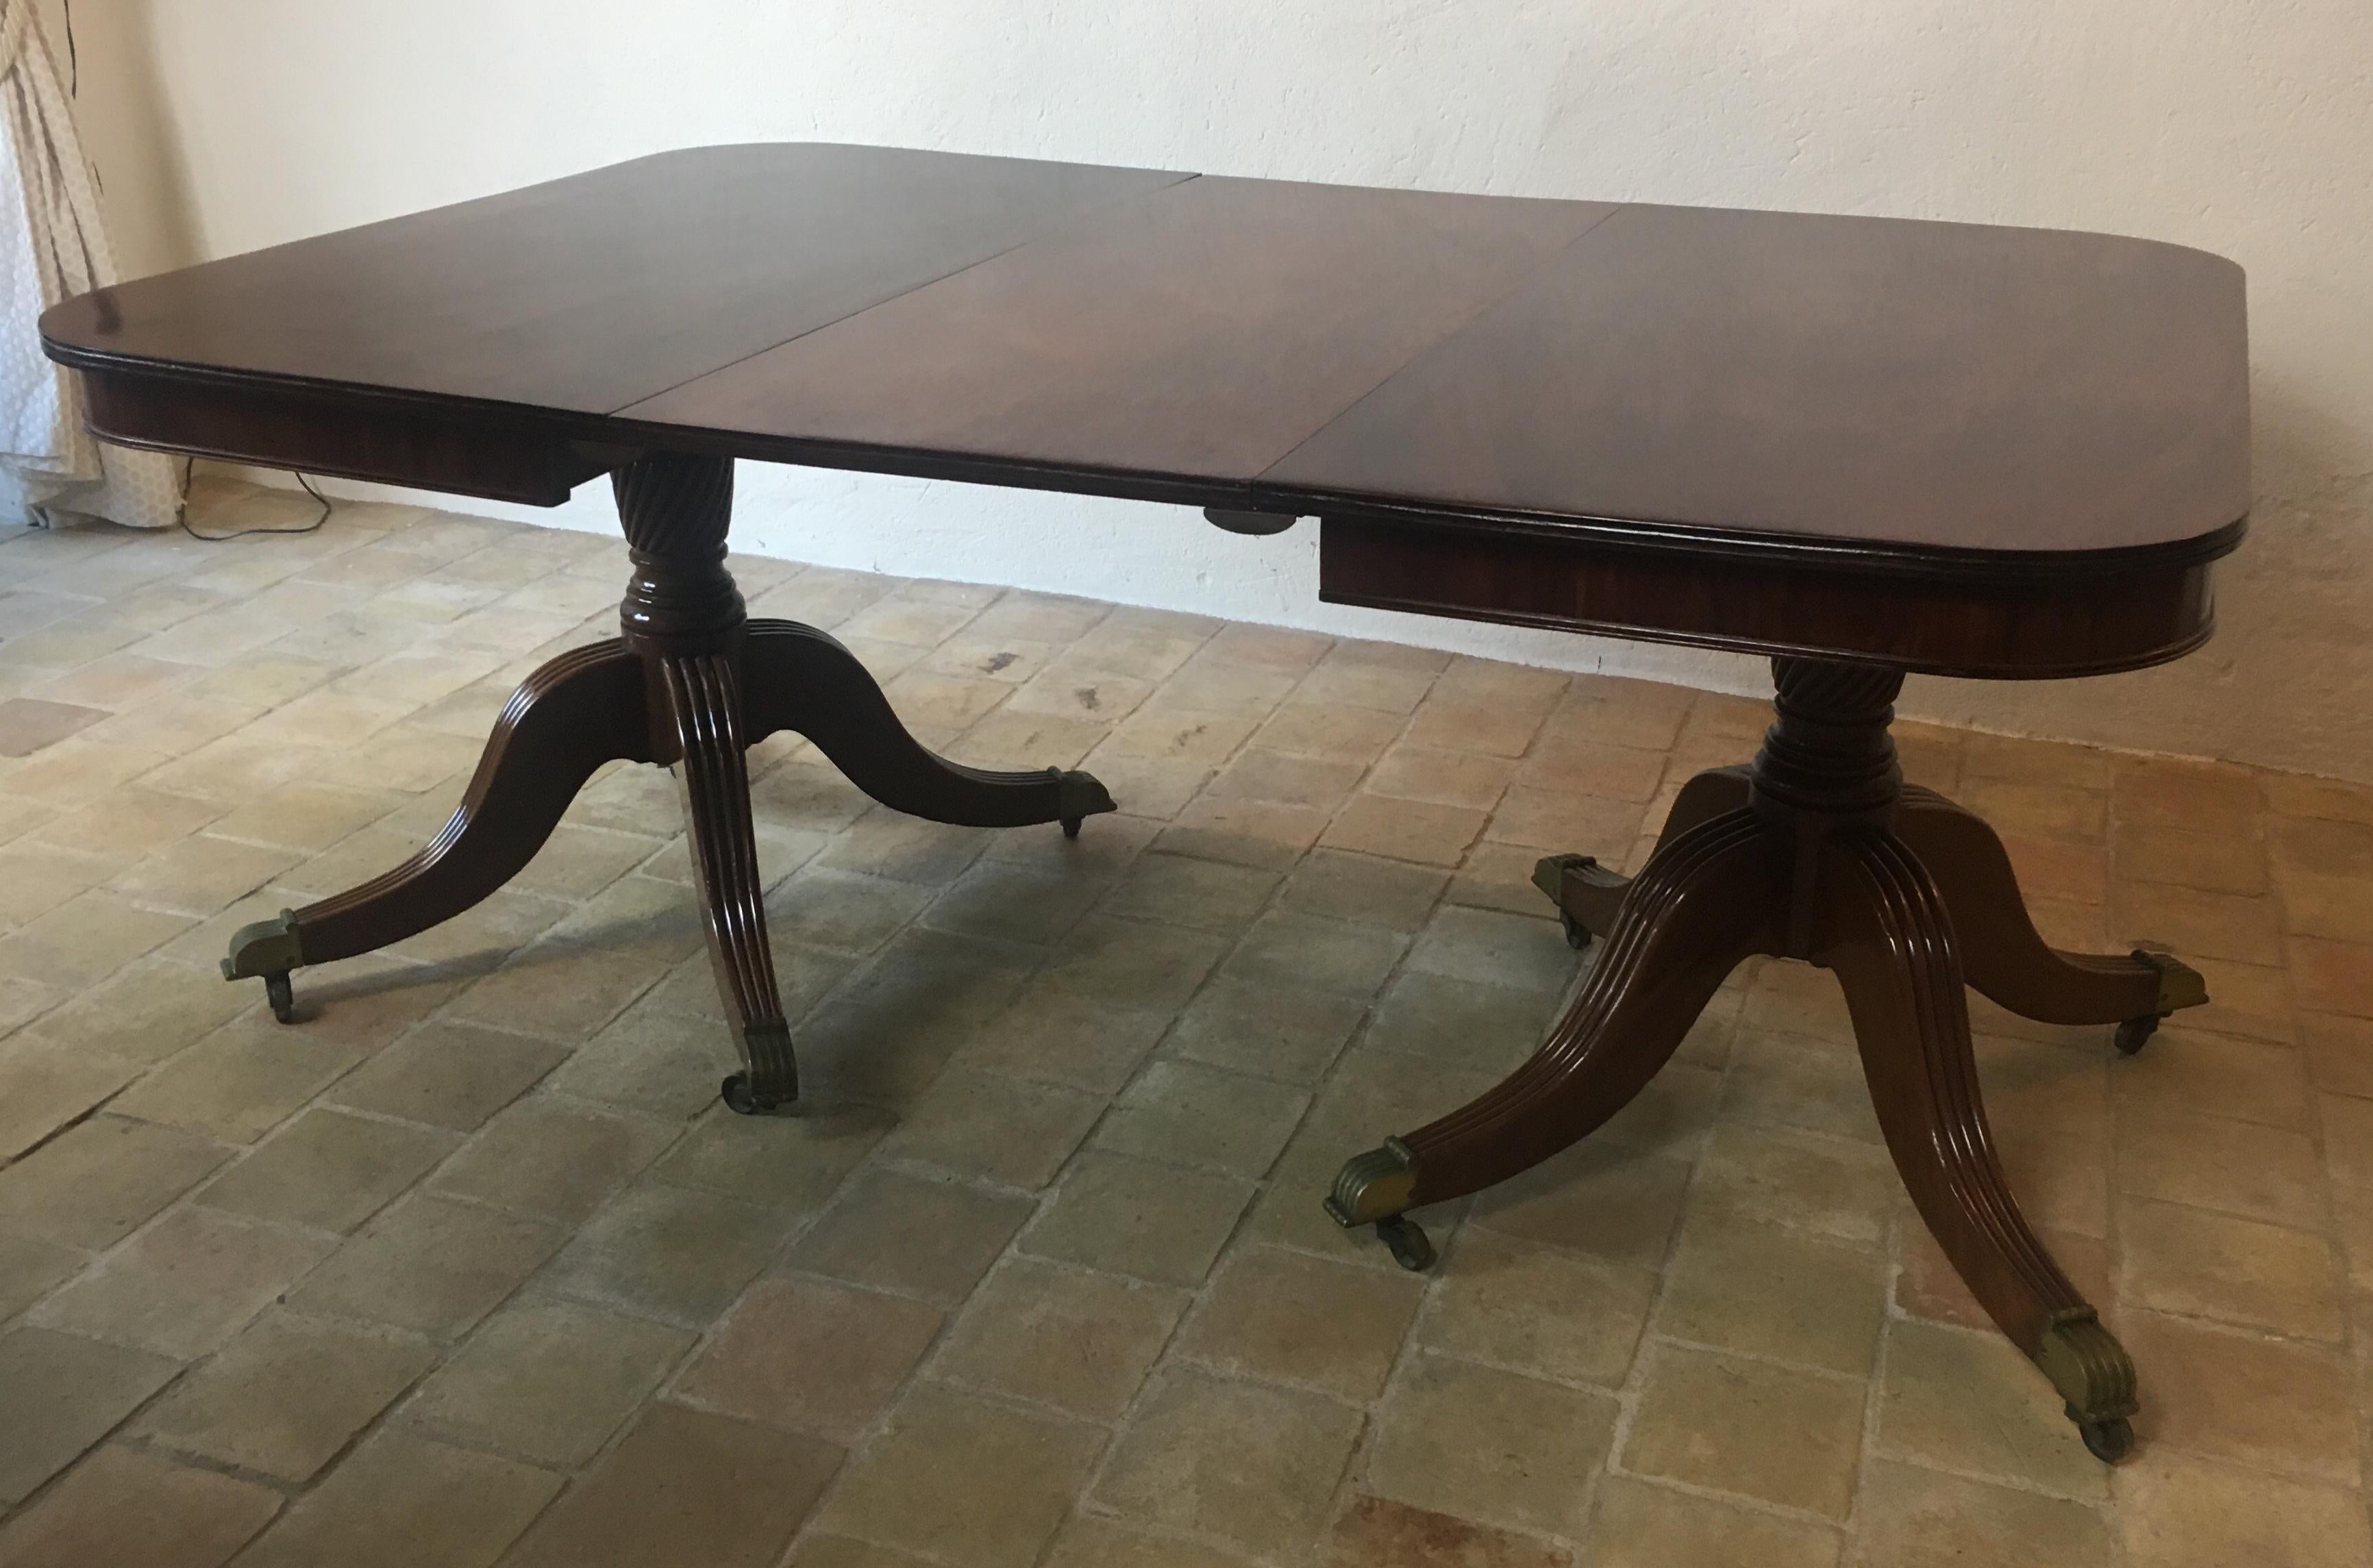 A superb quality English Regency dining table made of solid Cuban flame mahogany supported by two turned pillars/pedestals above four swept legs, terminating on brass casters. Extendable. 

The remarkable flame mahogany wood has a beautiful grain